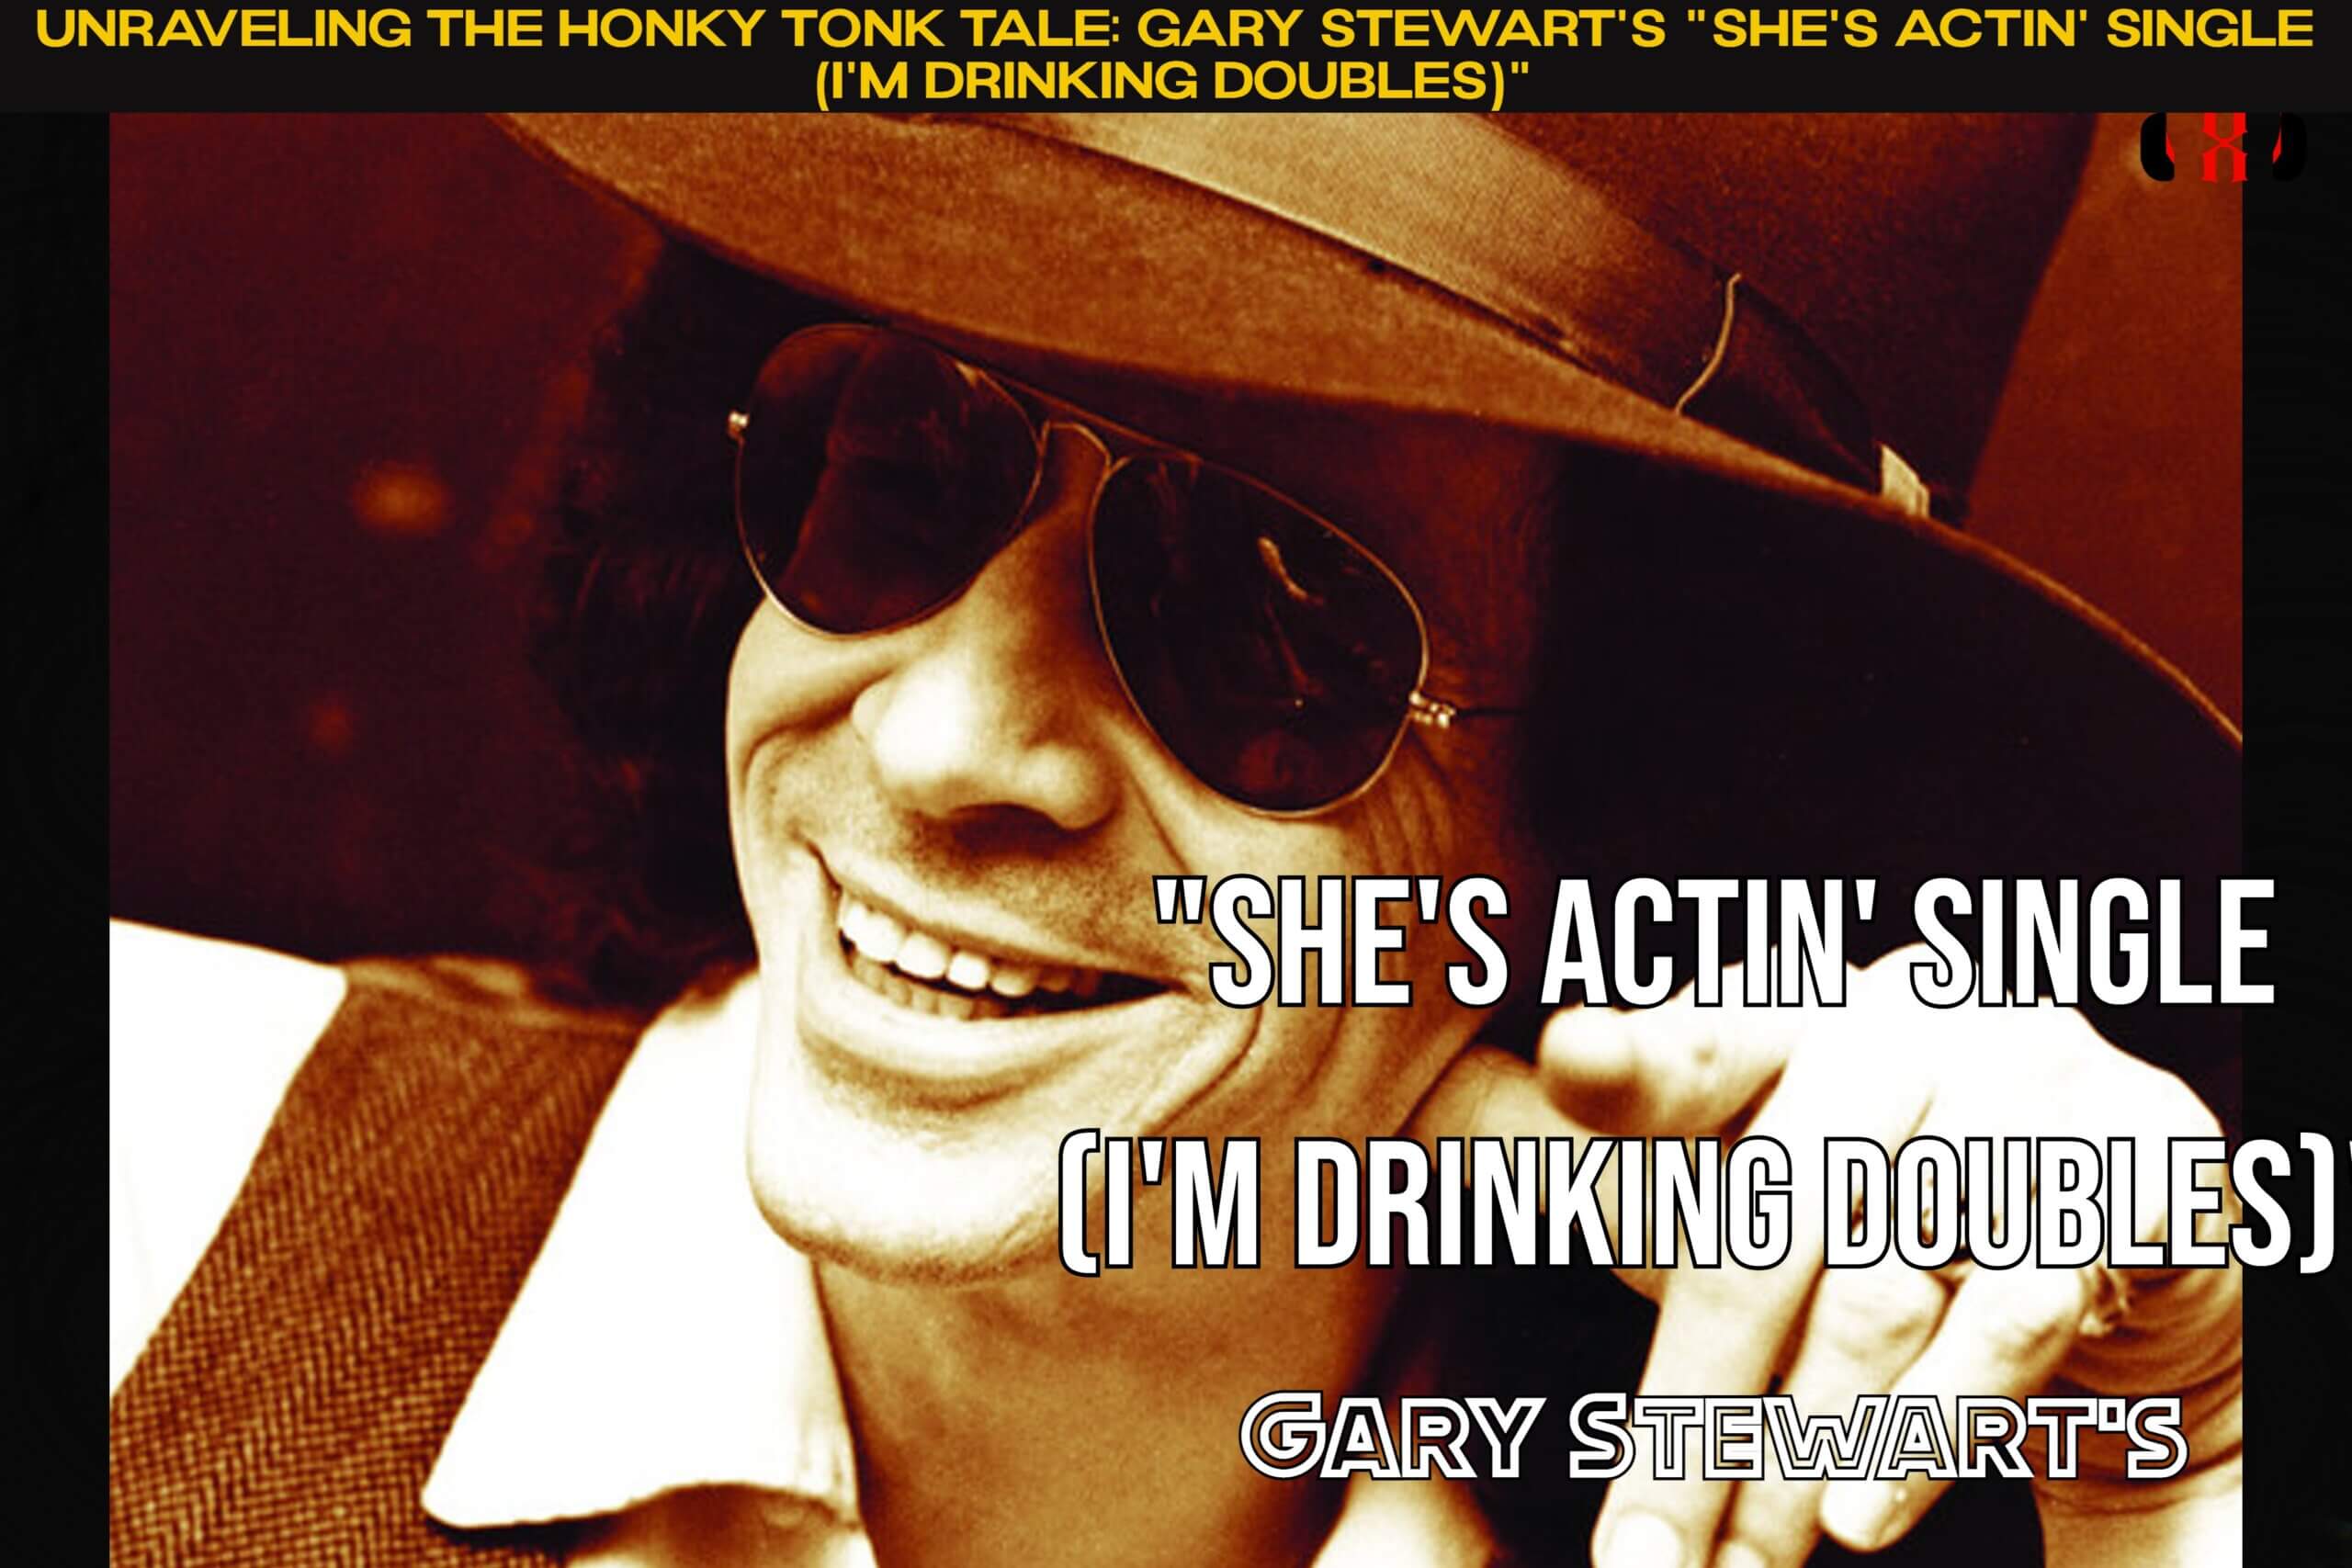 Unraveling the Honky Tonk Tale: Gary Stewart's "She's Actin' Single (I'm Drinking Doubles)"